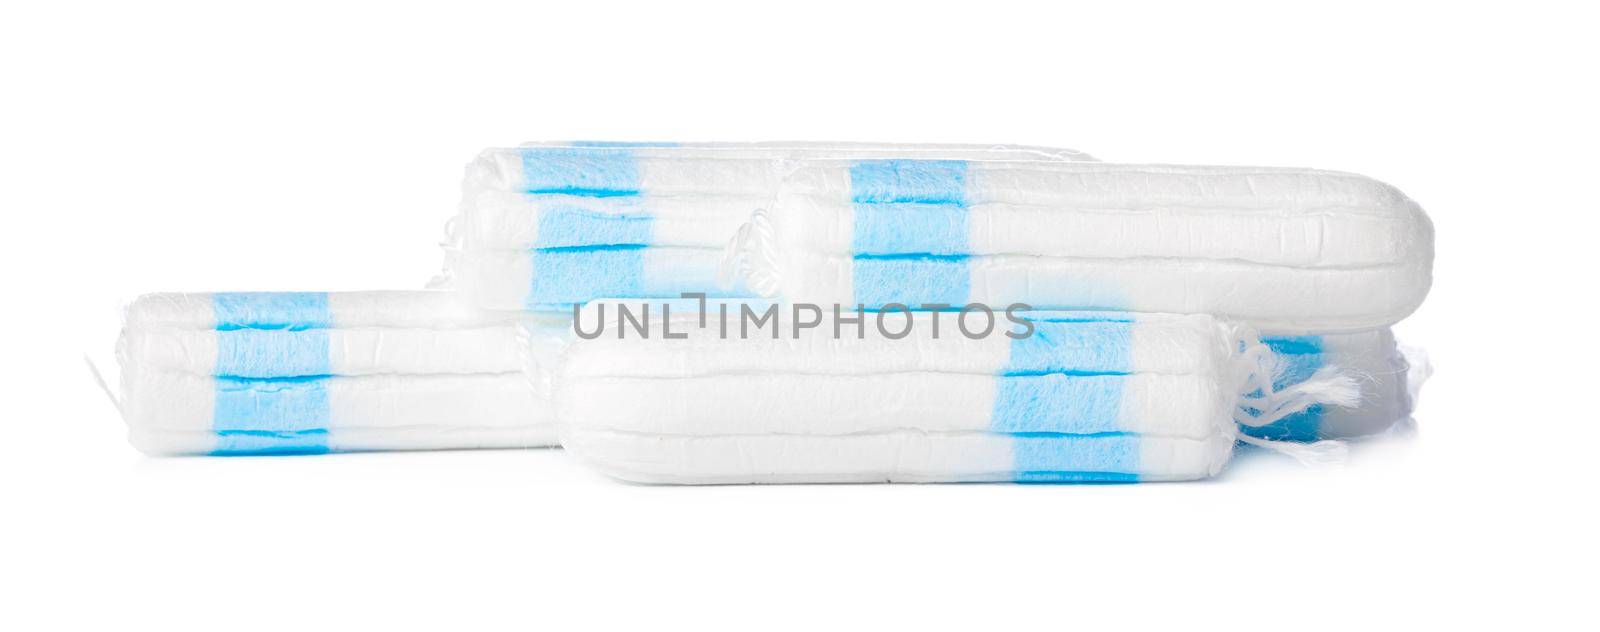 Women hygienic tampons isolated on white background close up